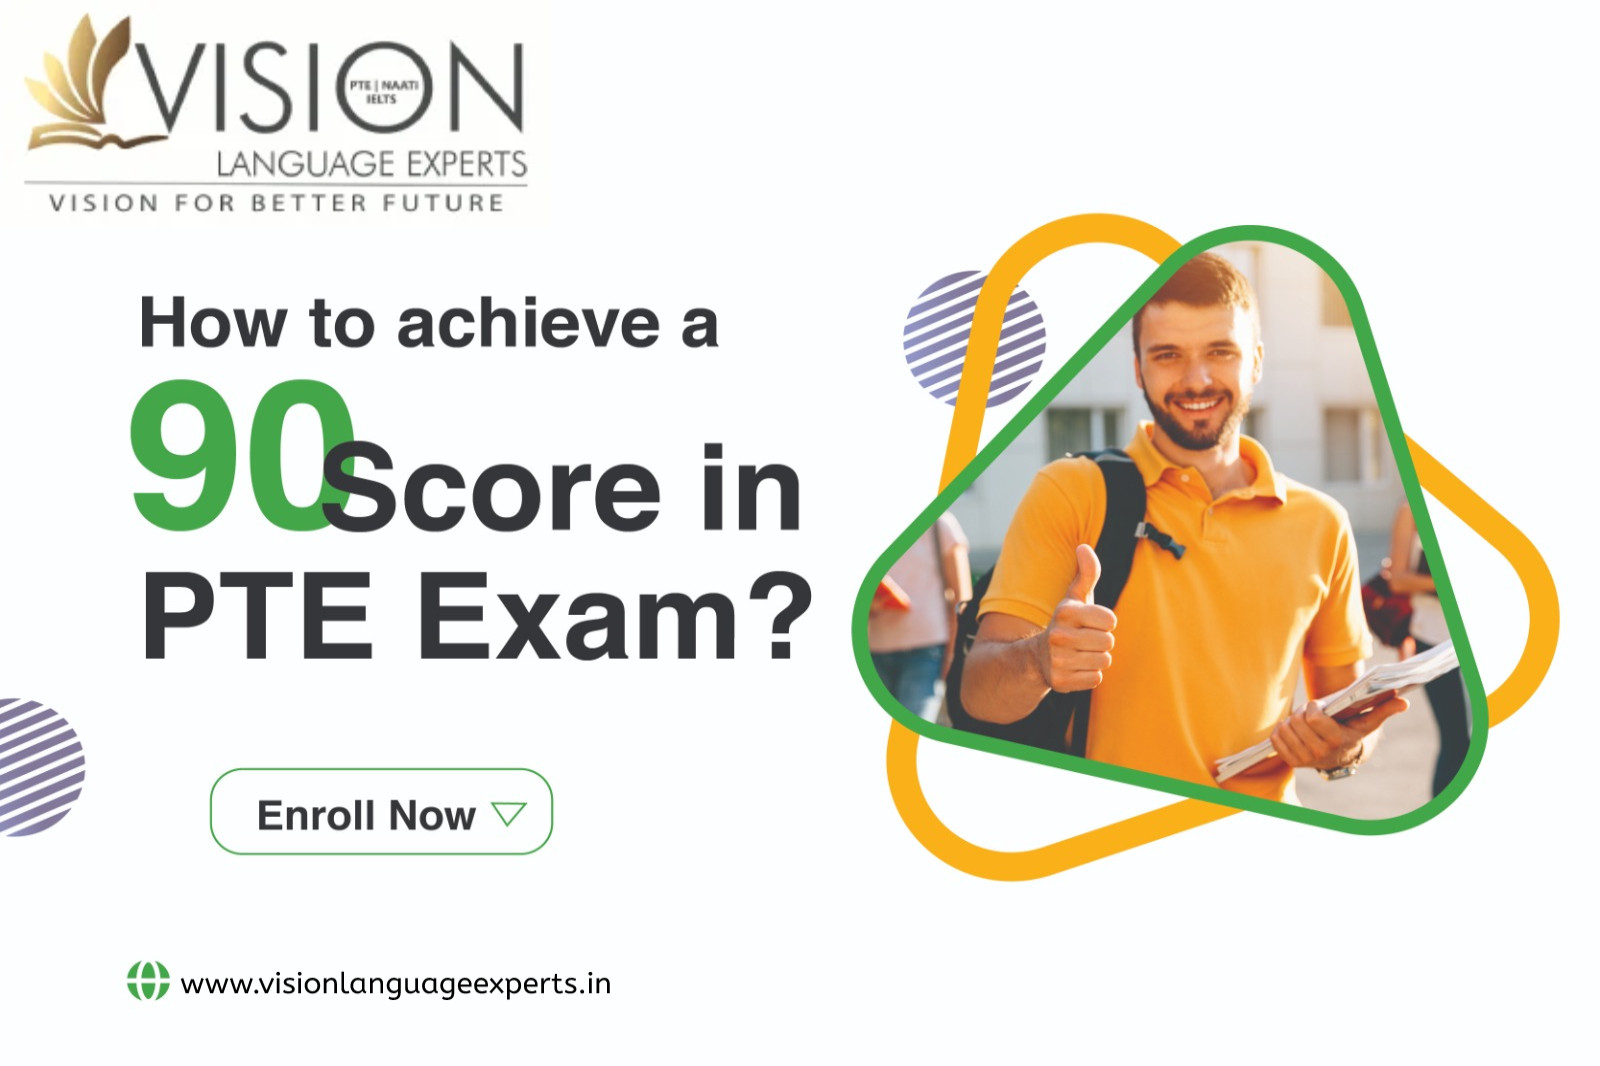 How to achieve a 90 Score in PTE Exam?